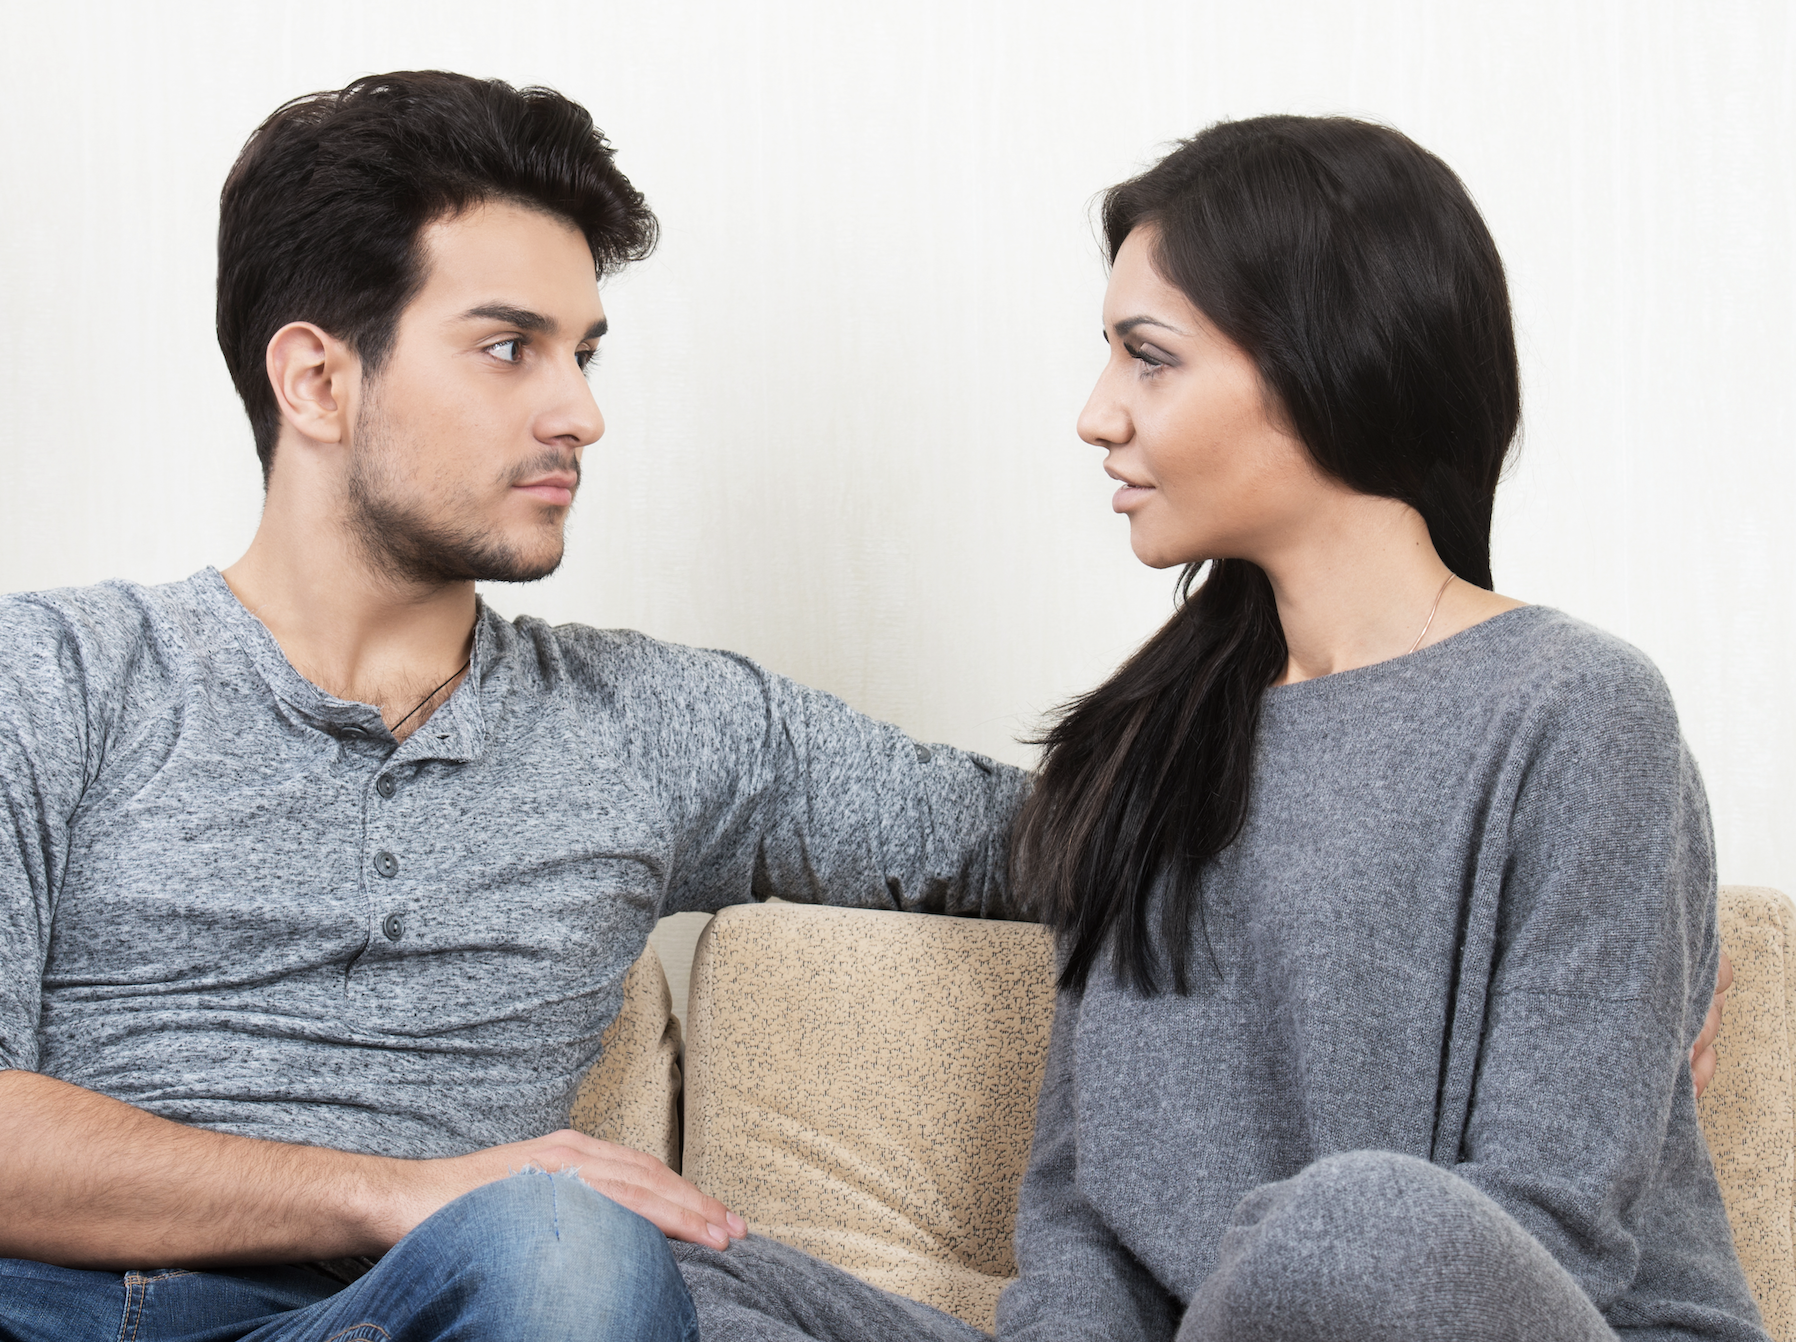 Maintaining Relationship Happiness in an Open Relationship